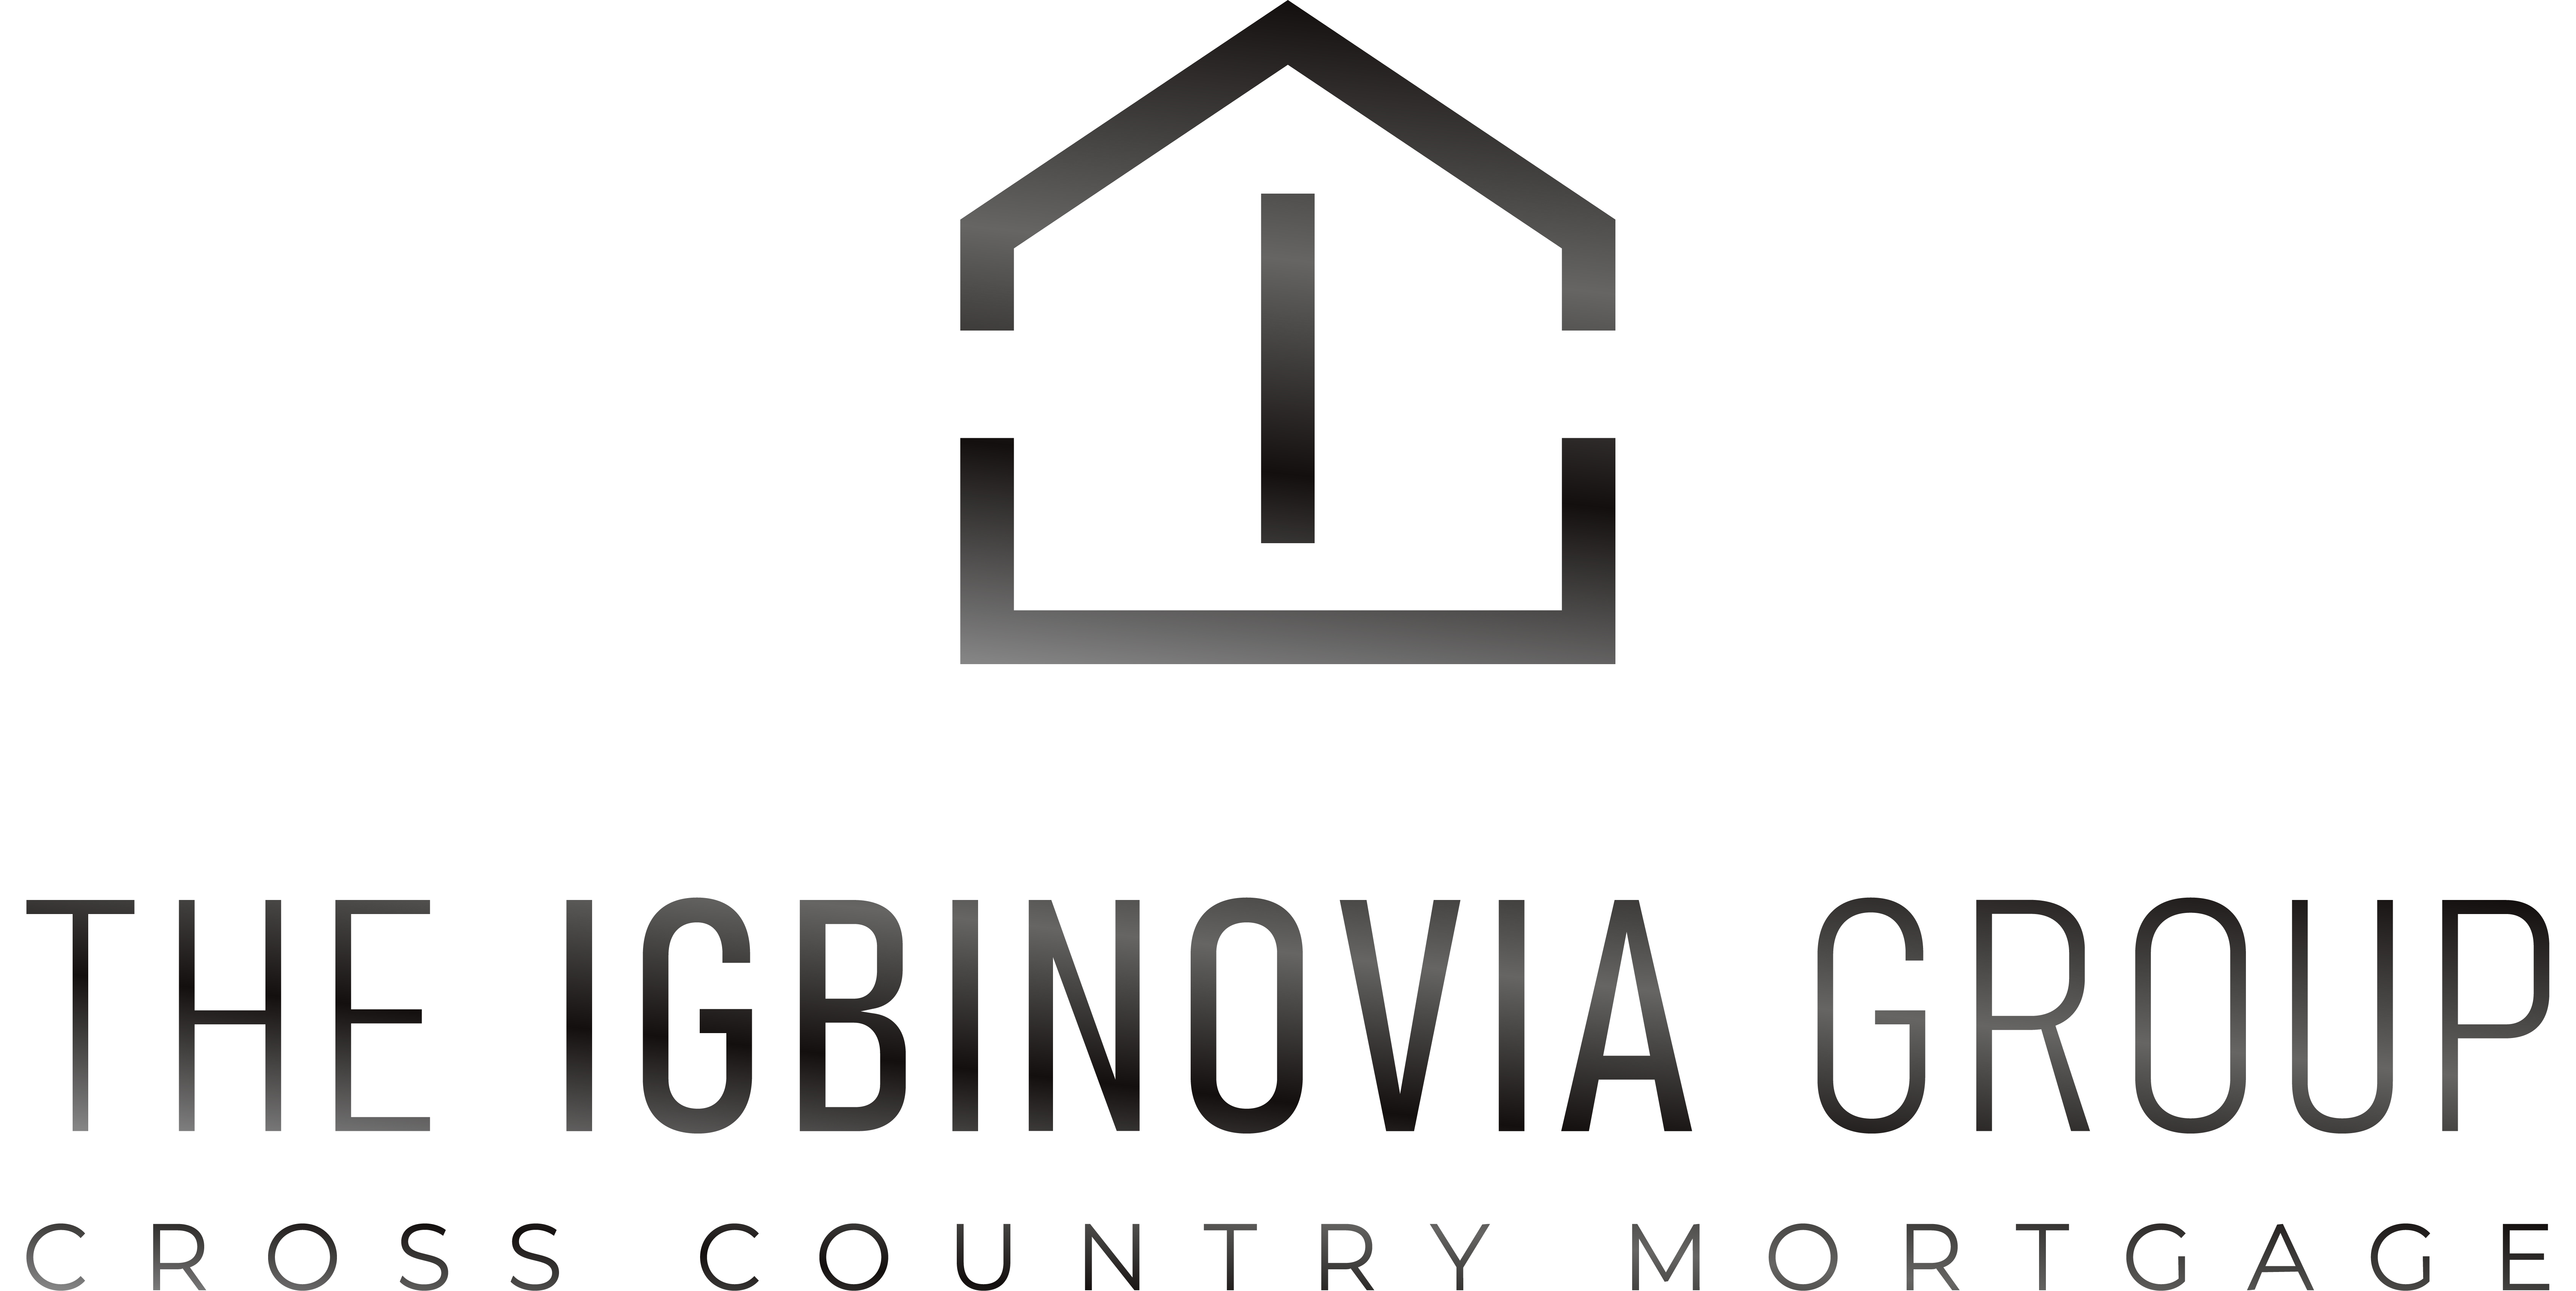 CrossCountry Mortgage - The Igbinovia Group